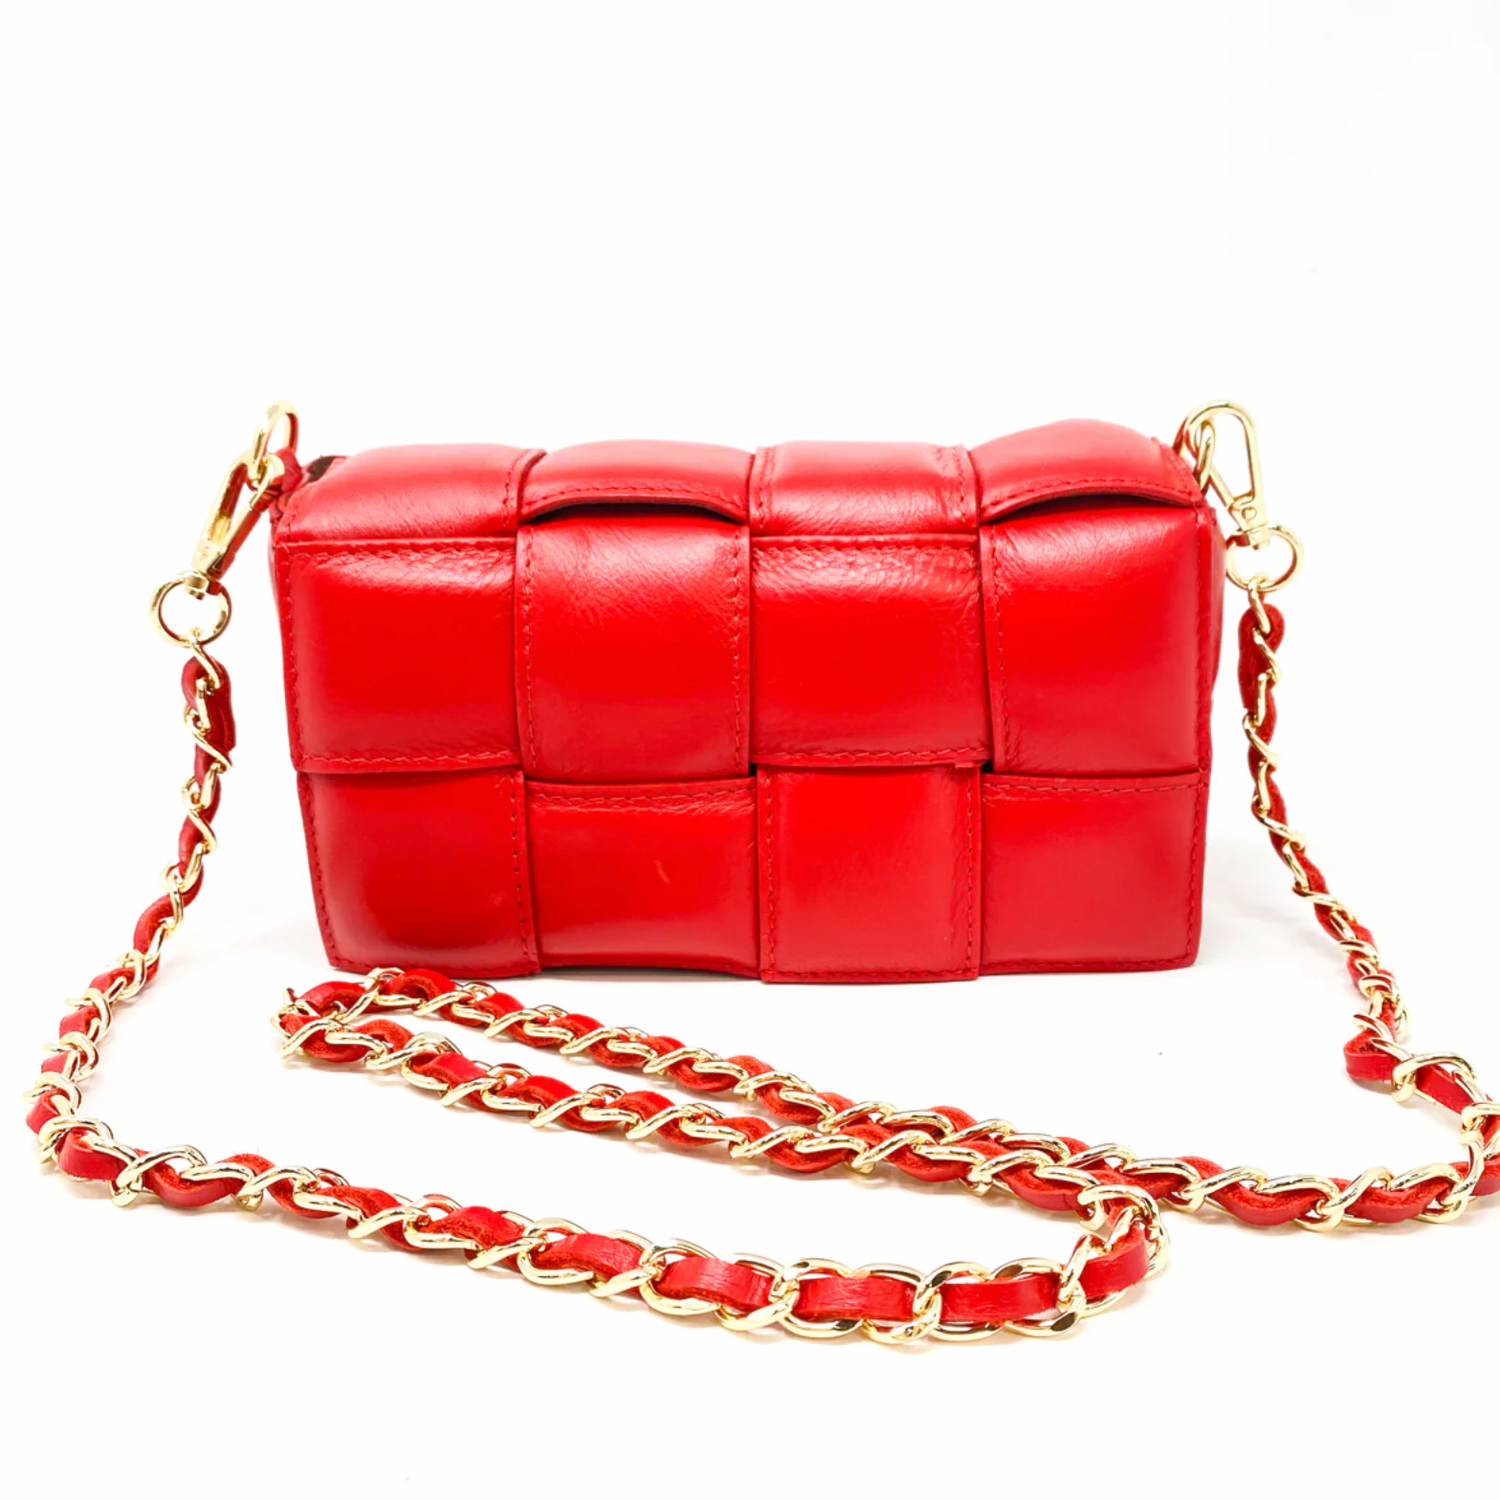 Red Leather Quilted Handbag